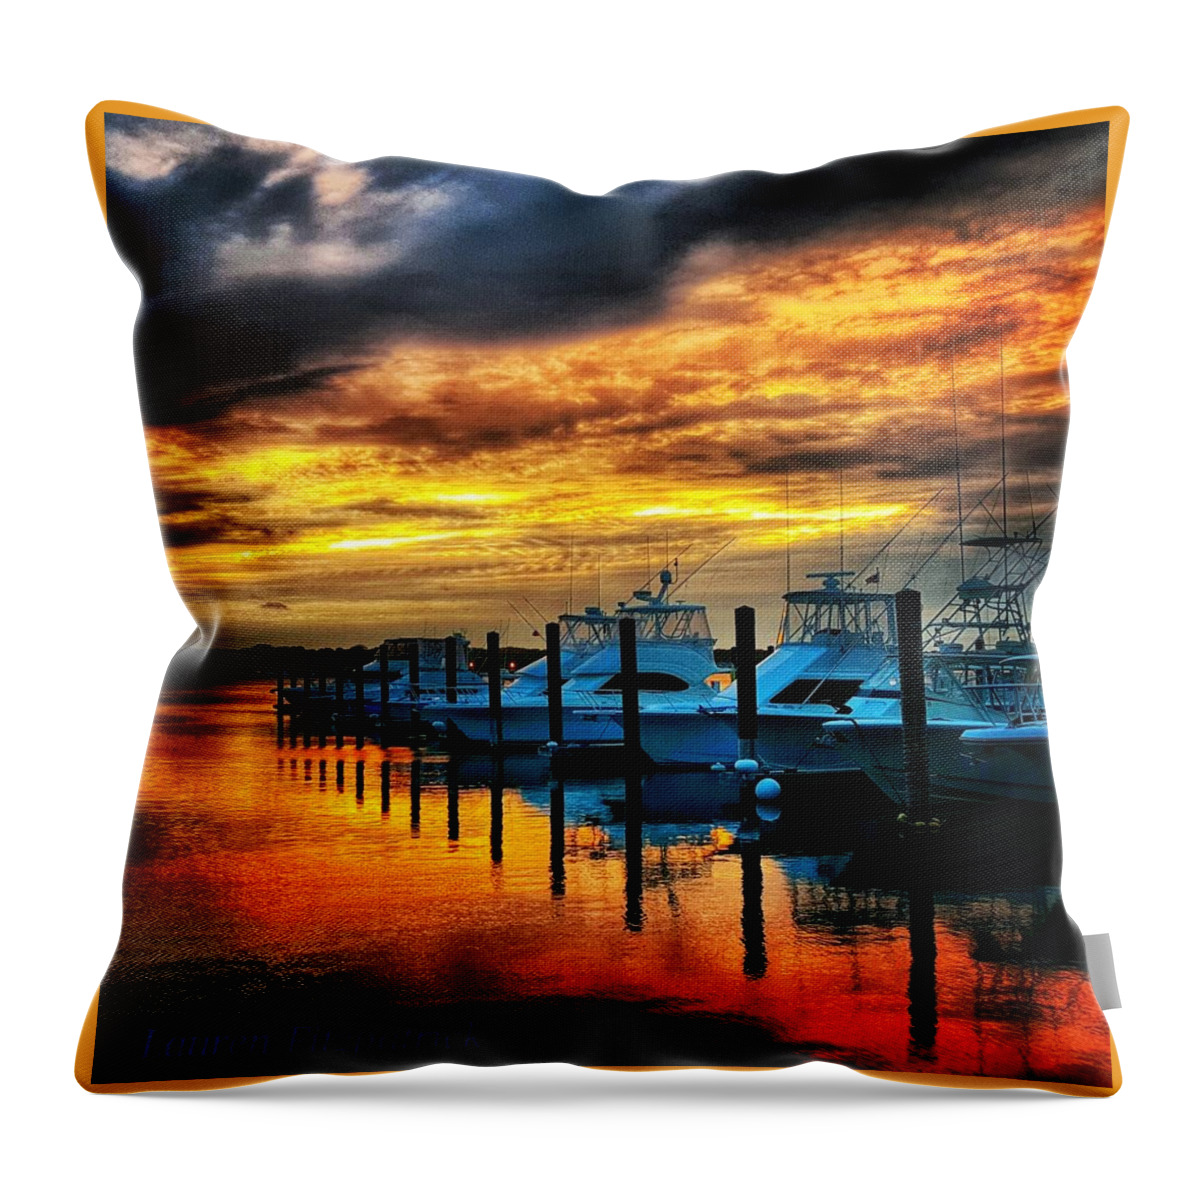  Throw Pillow featuring the photograph Boat Reflections at Sunset by Lauren Fitzpatrick